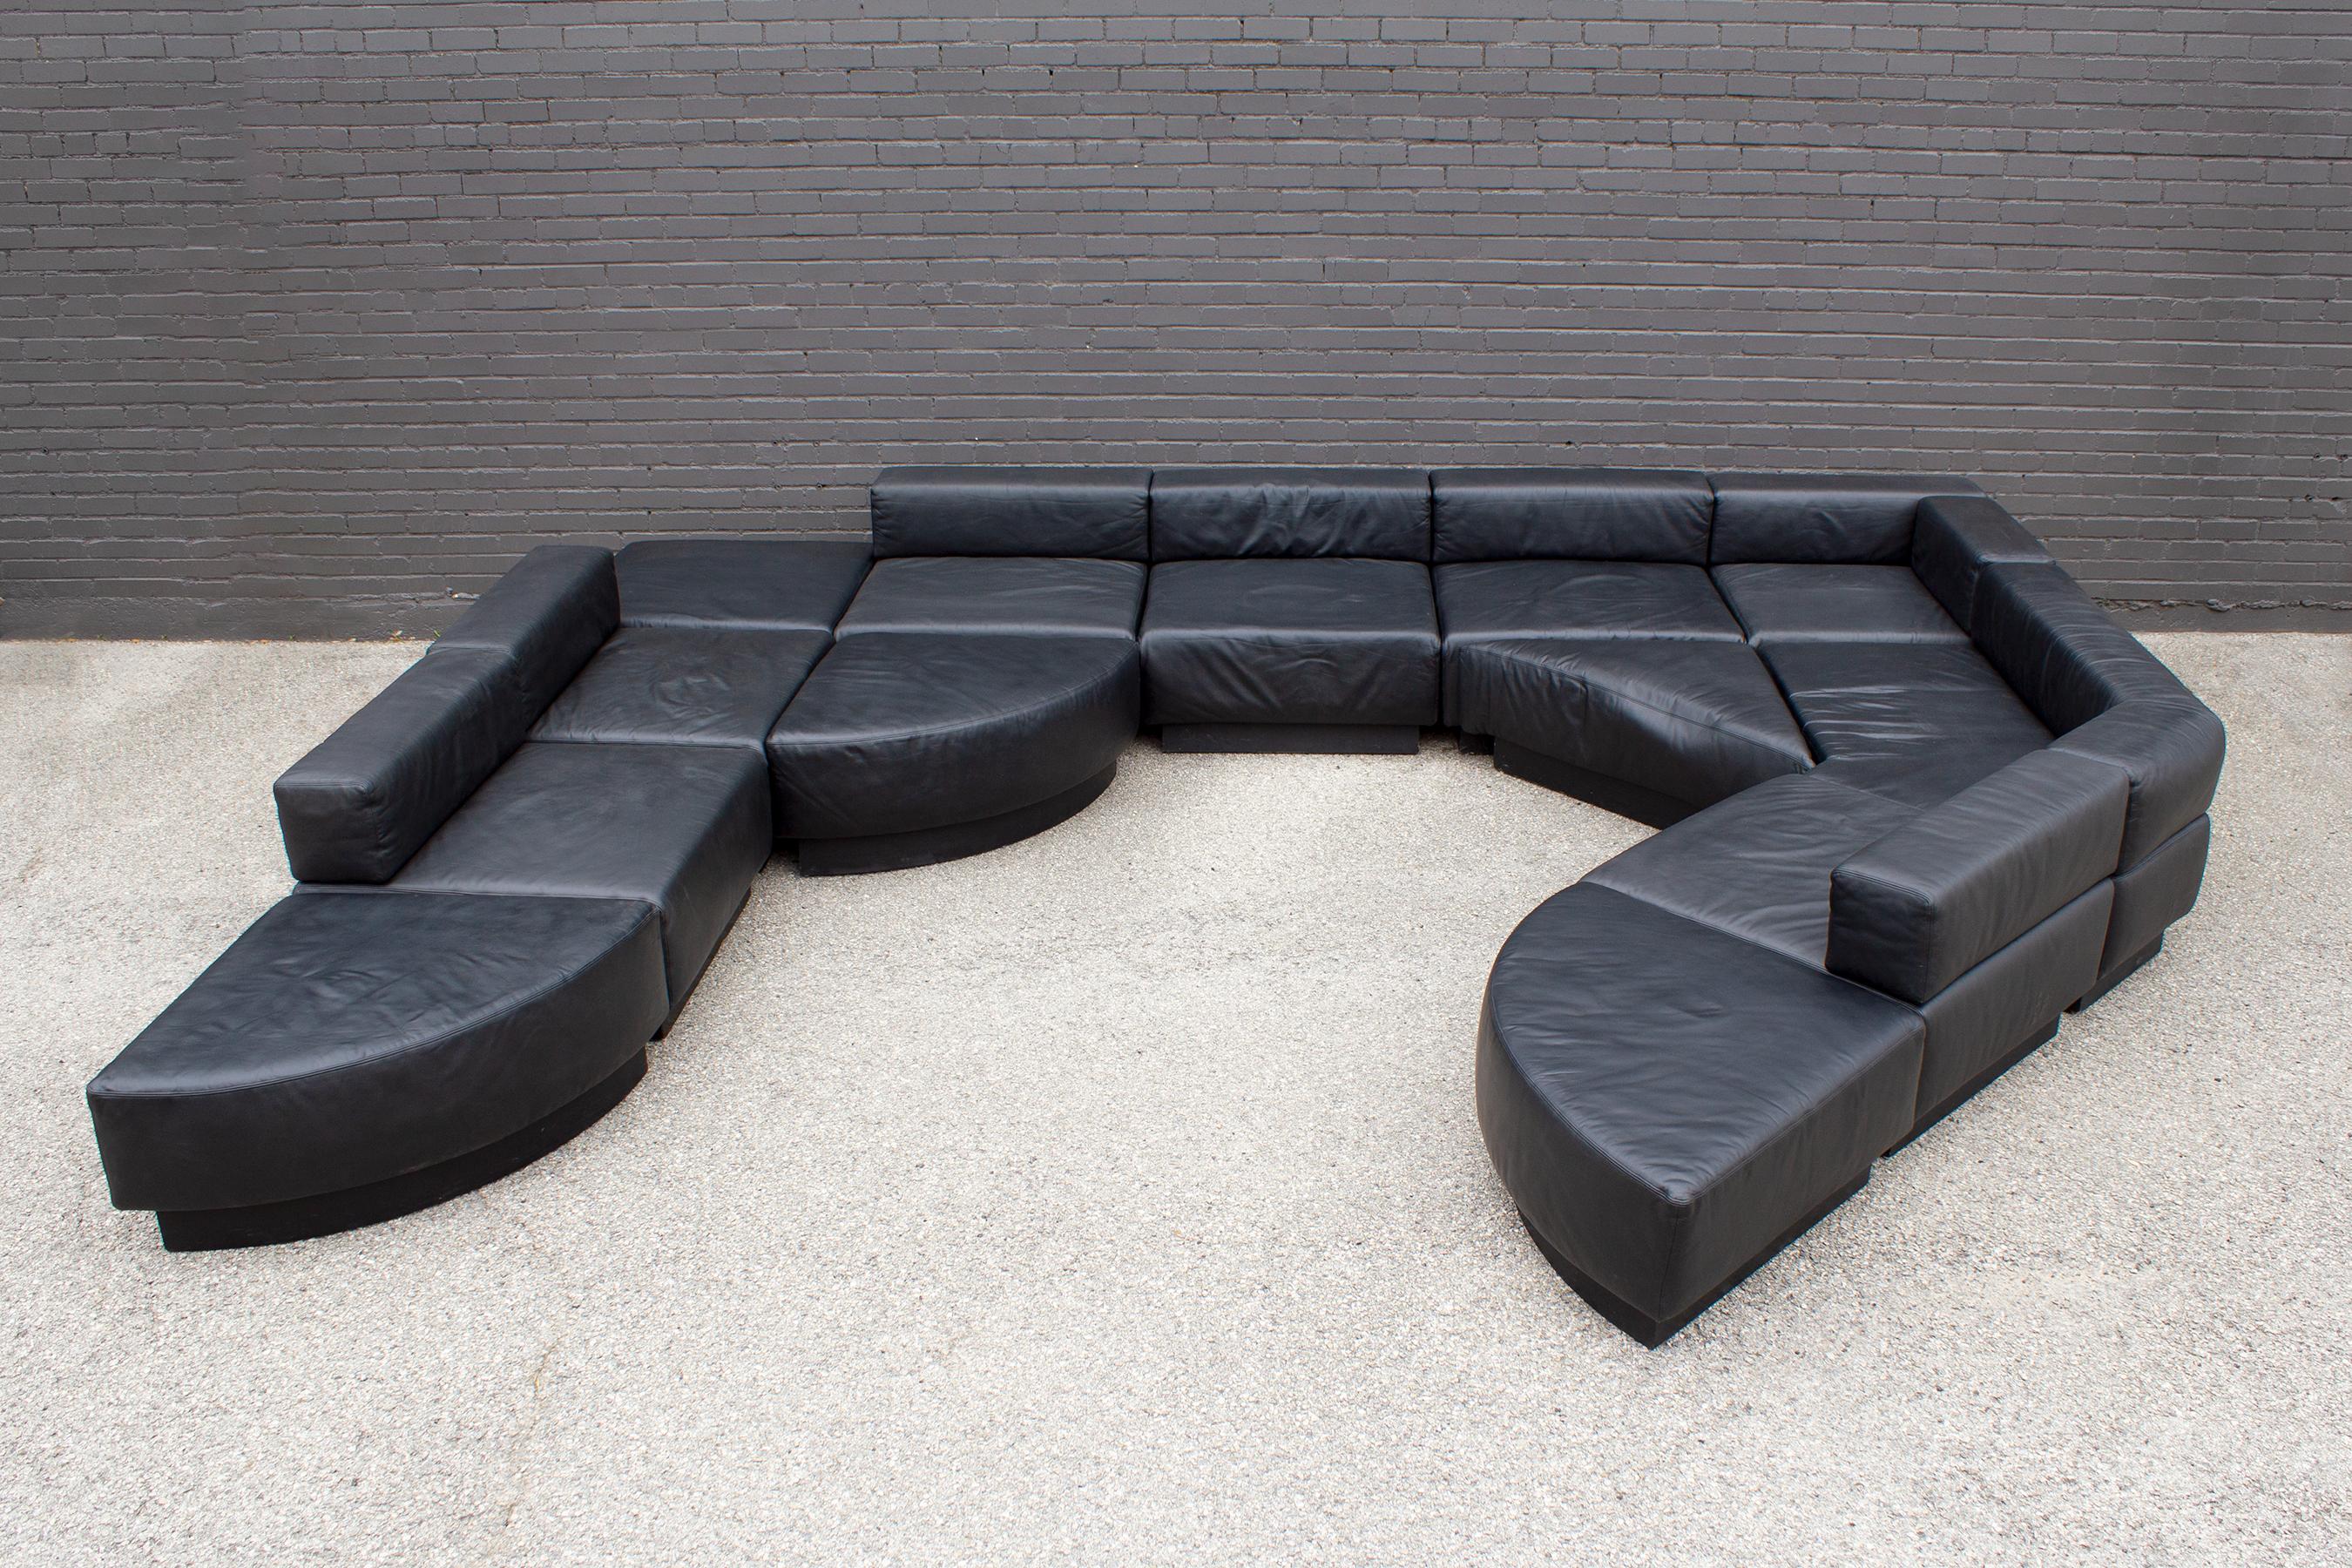 Black Leather Leather 'Cubo' Sectional Sofa by Harvey Probber, 1970s For Sale 2